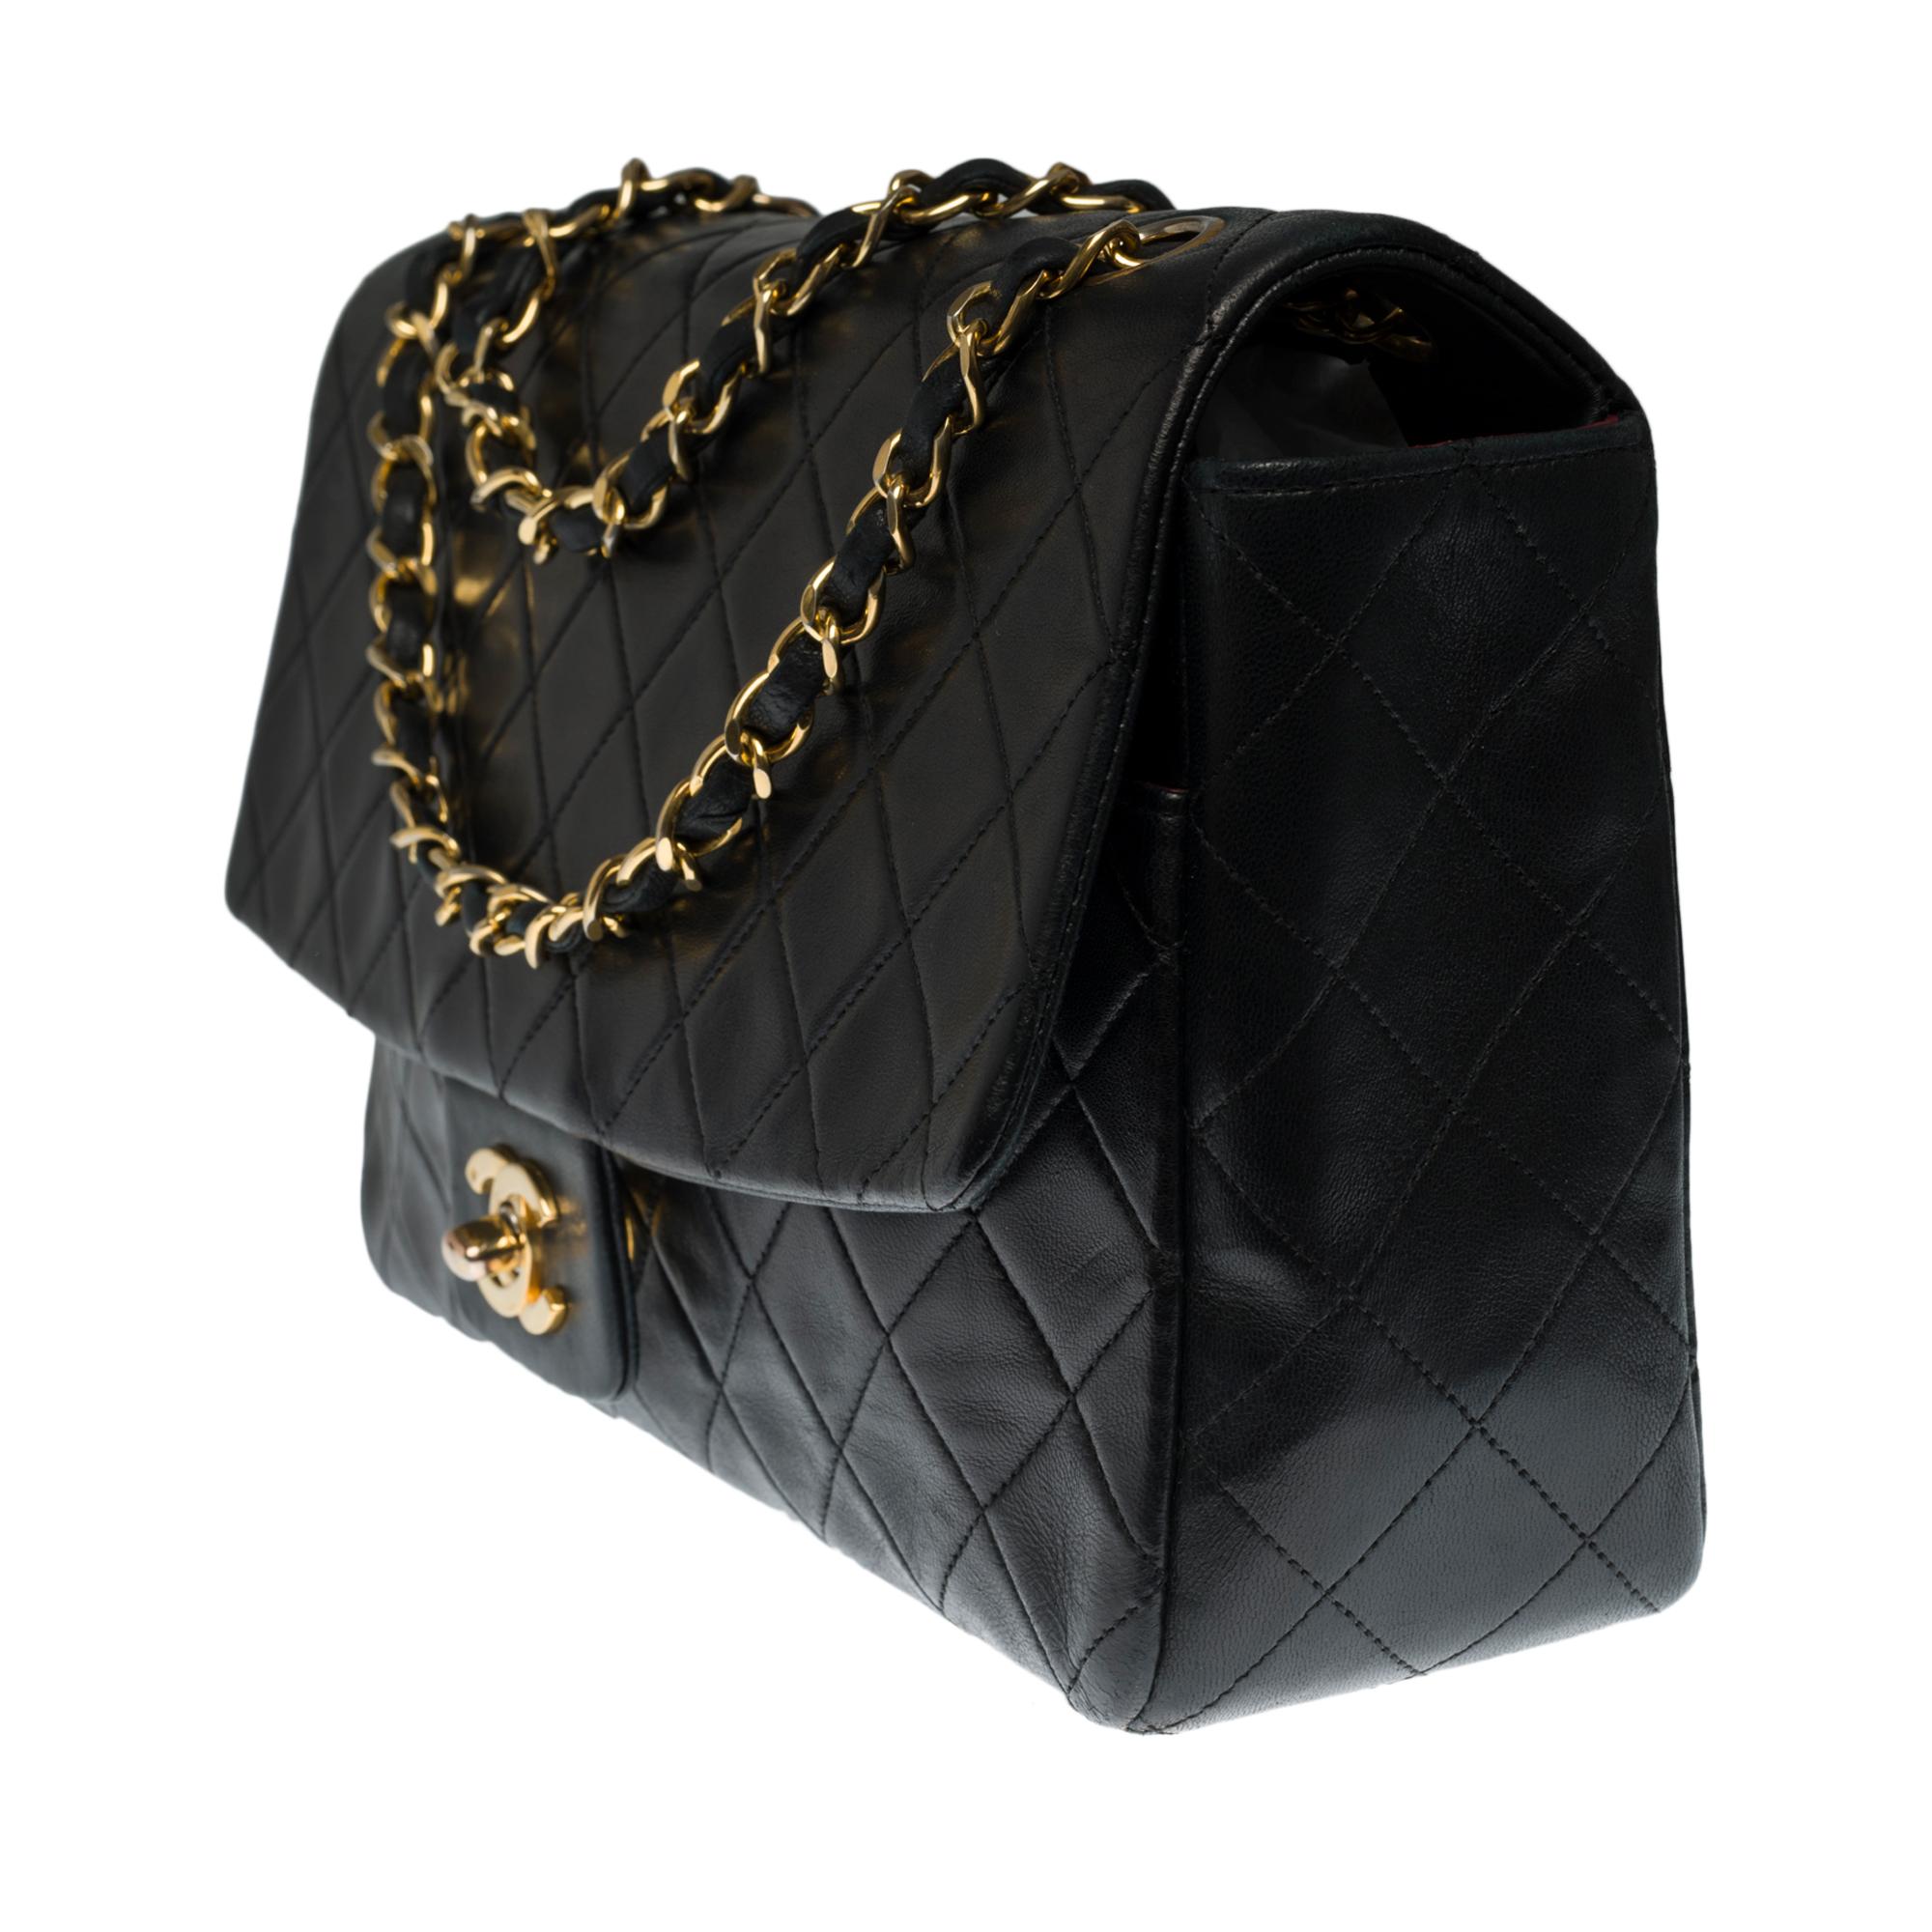 Black Chanel Timeless/Classic Flap shoulder bag in black quilted lambskin, GHW